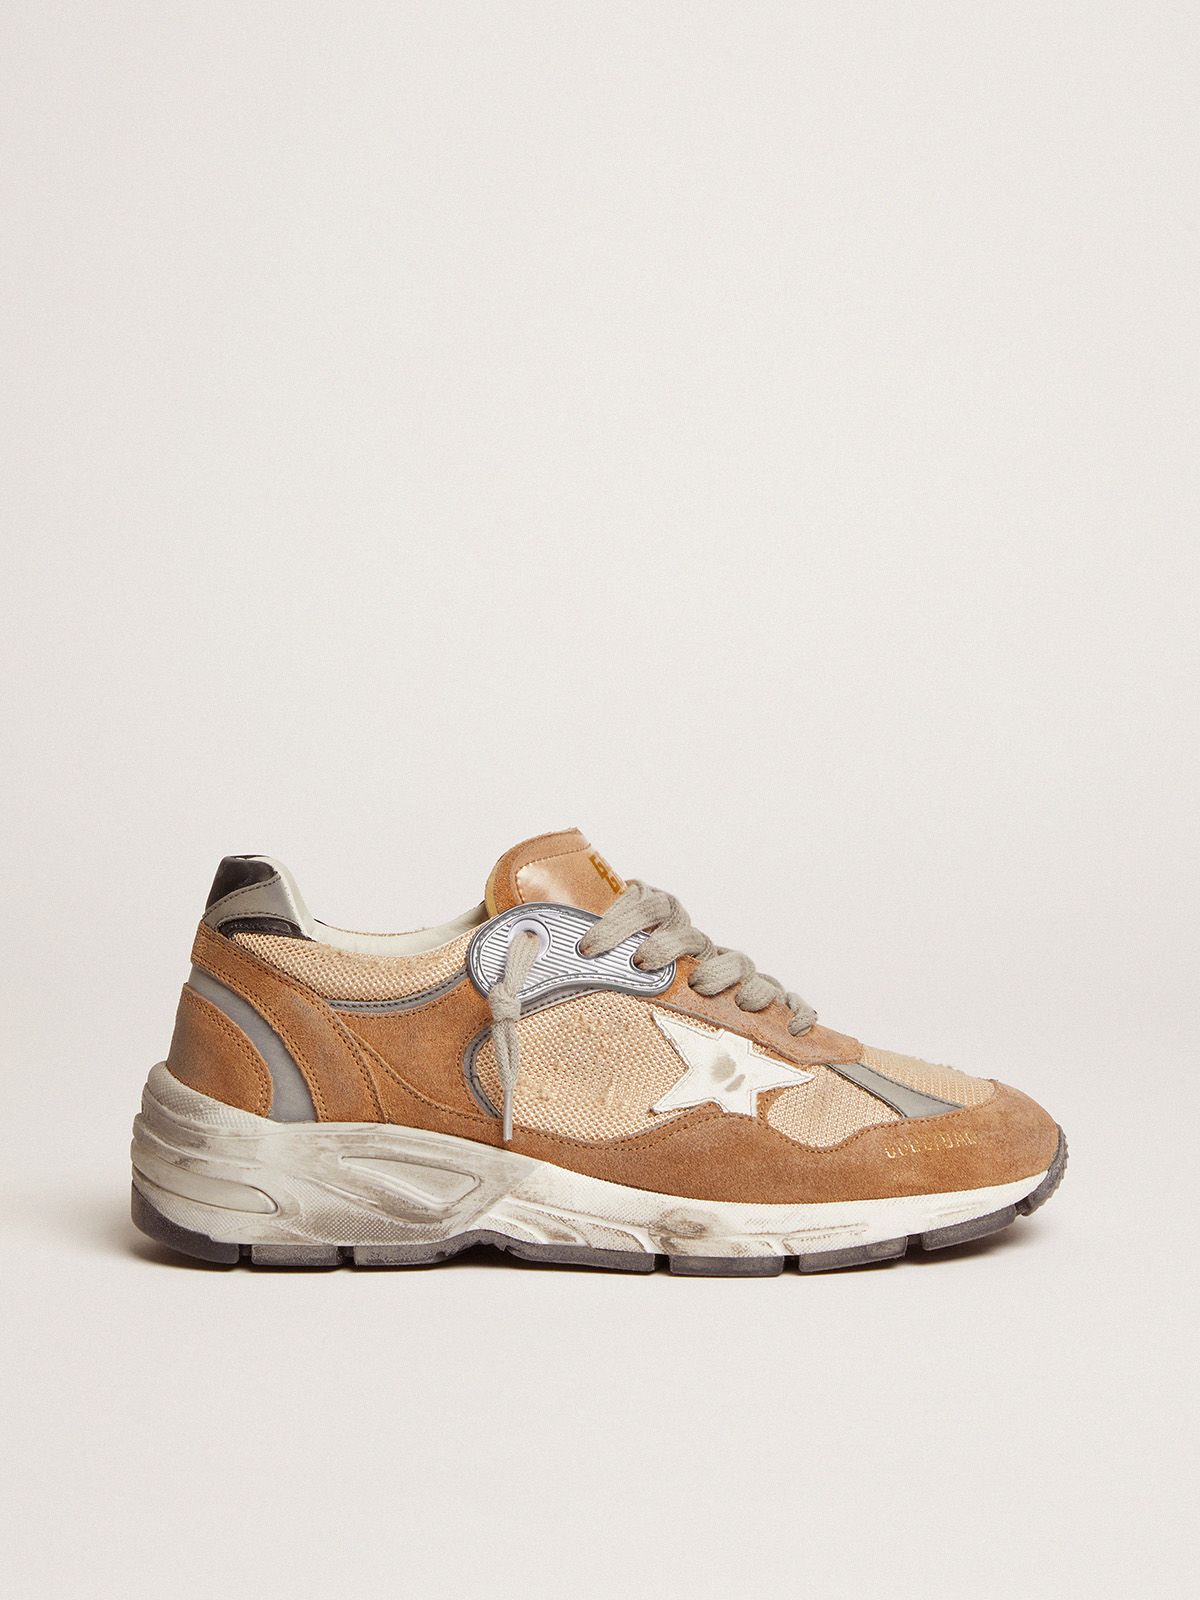 golden goose star tobacco-colored in white mesh suede leather with tab sneakers heel black and Dad-Star